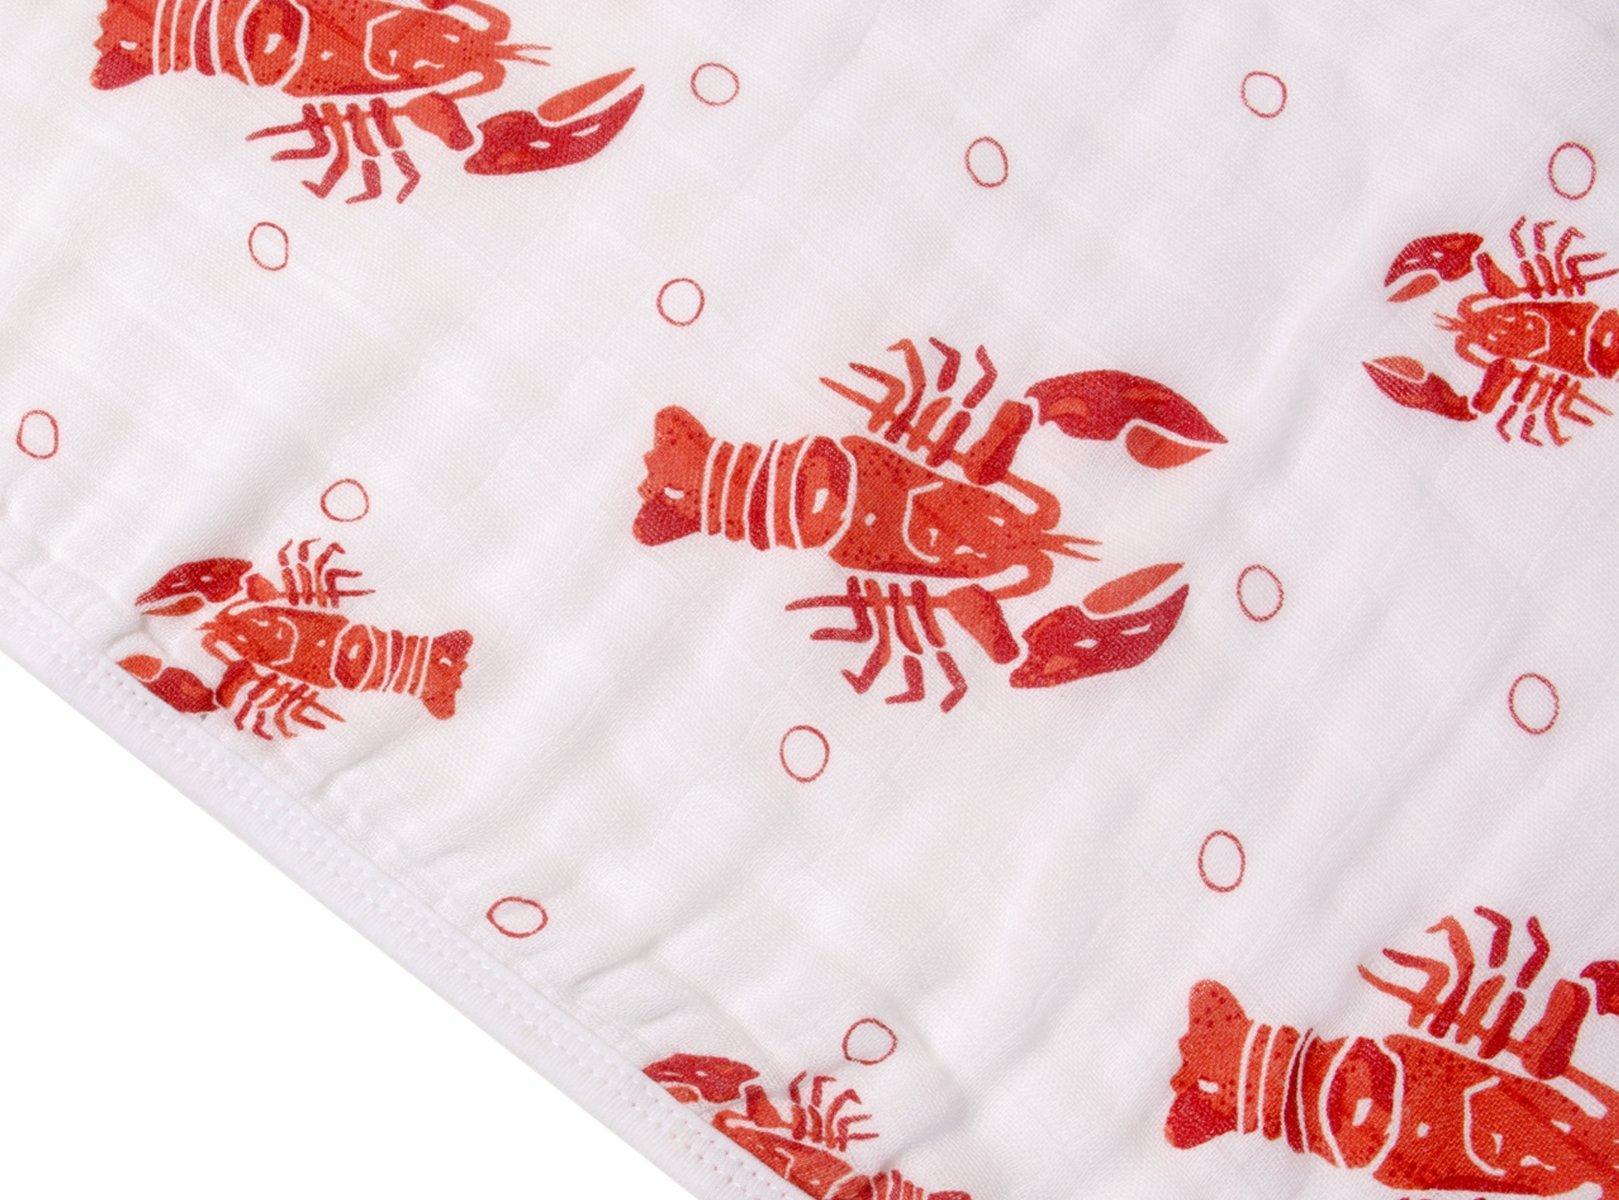 Baby bib and burp cloth set with red crawfish and lobster print, labeled "Little Hometown."